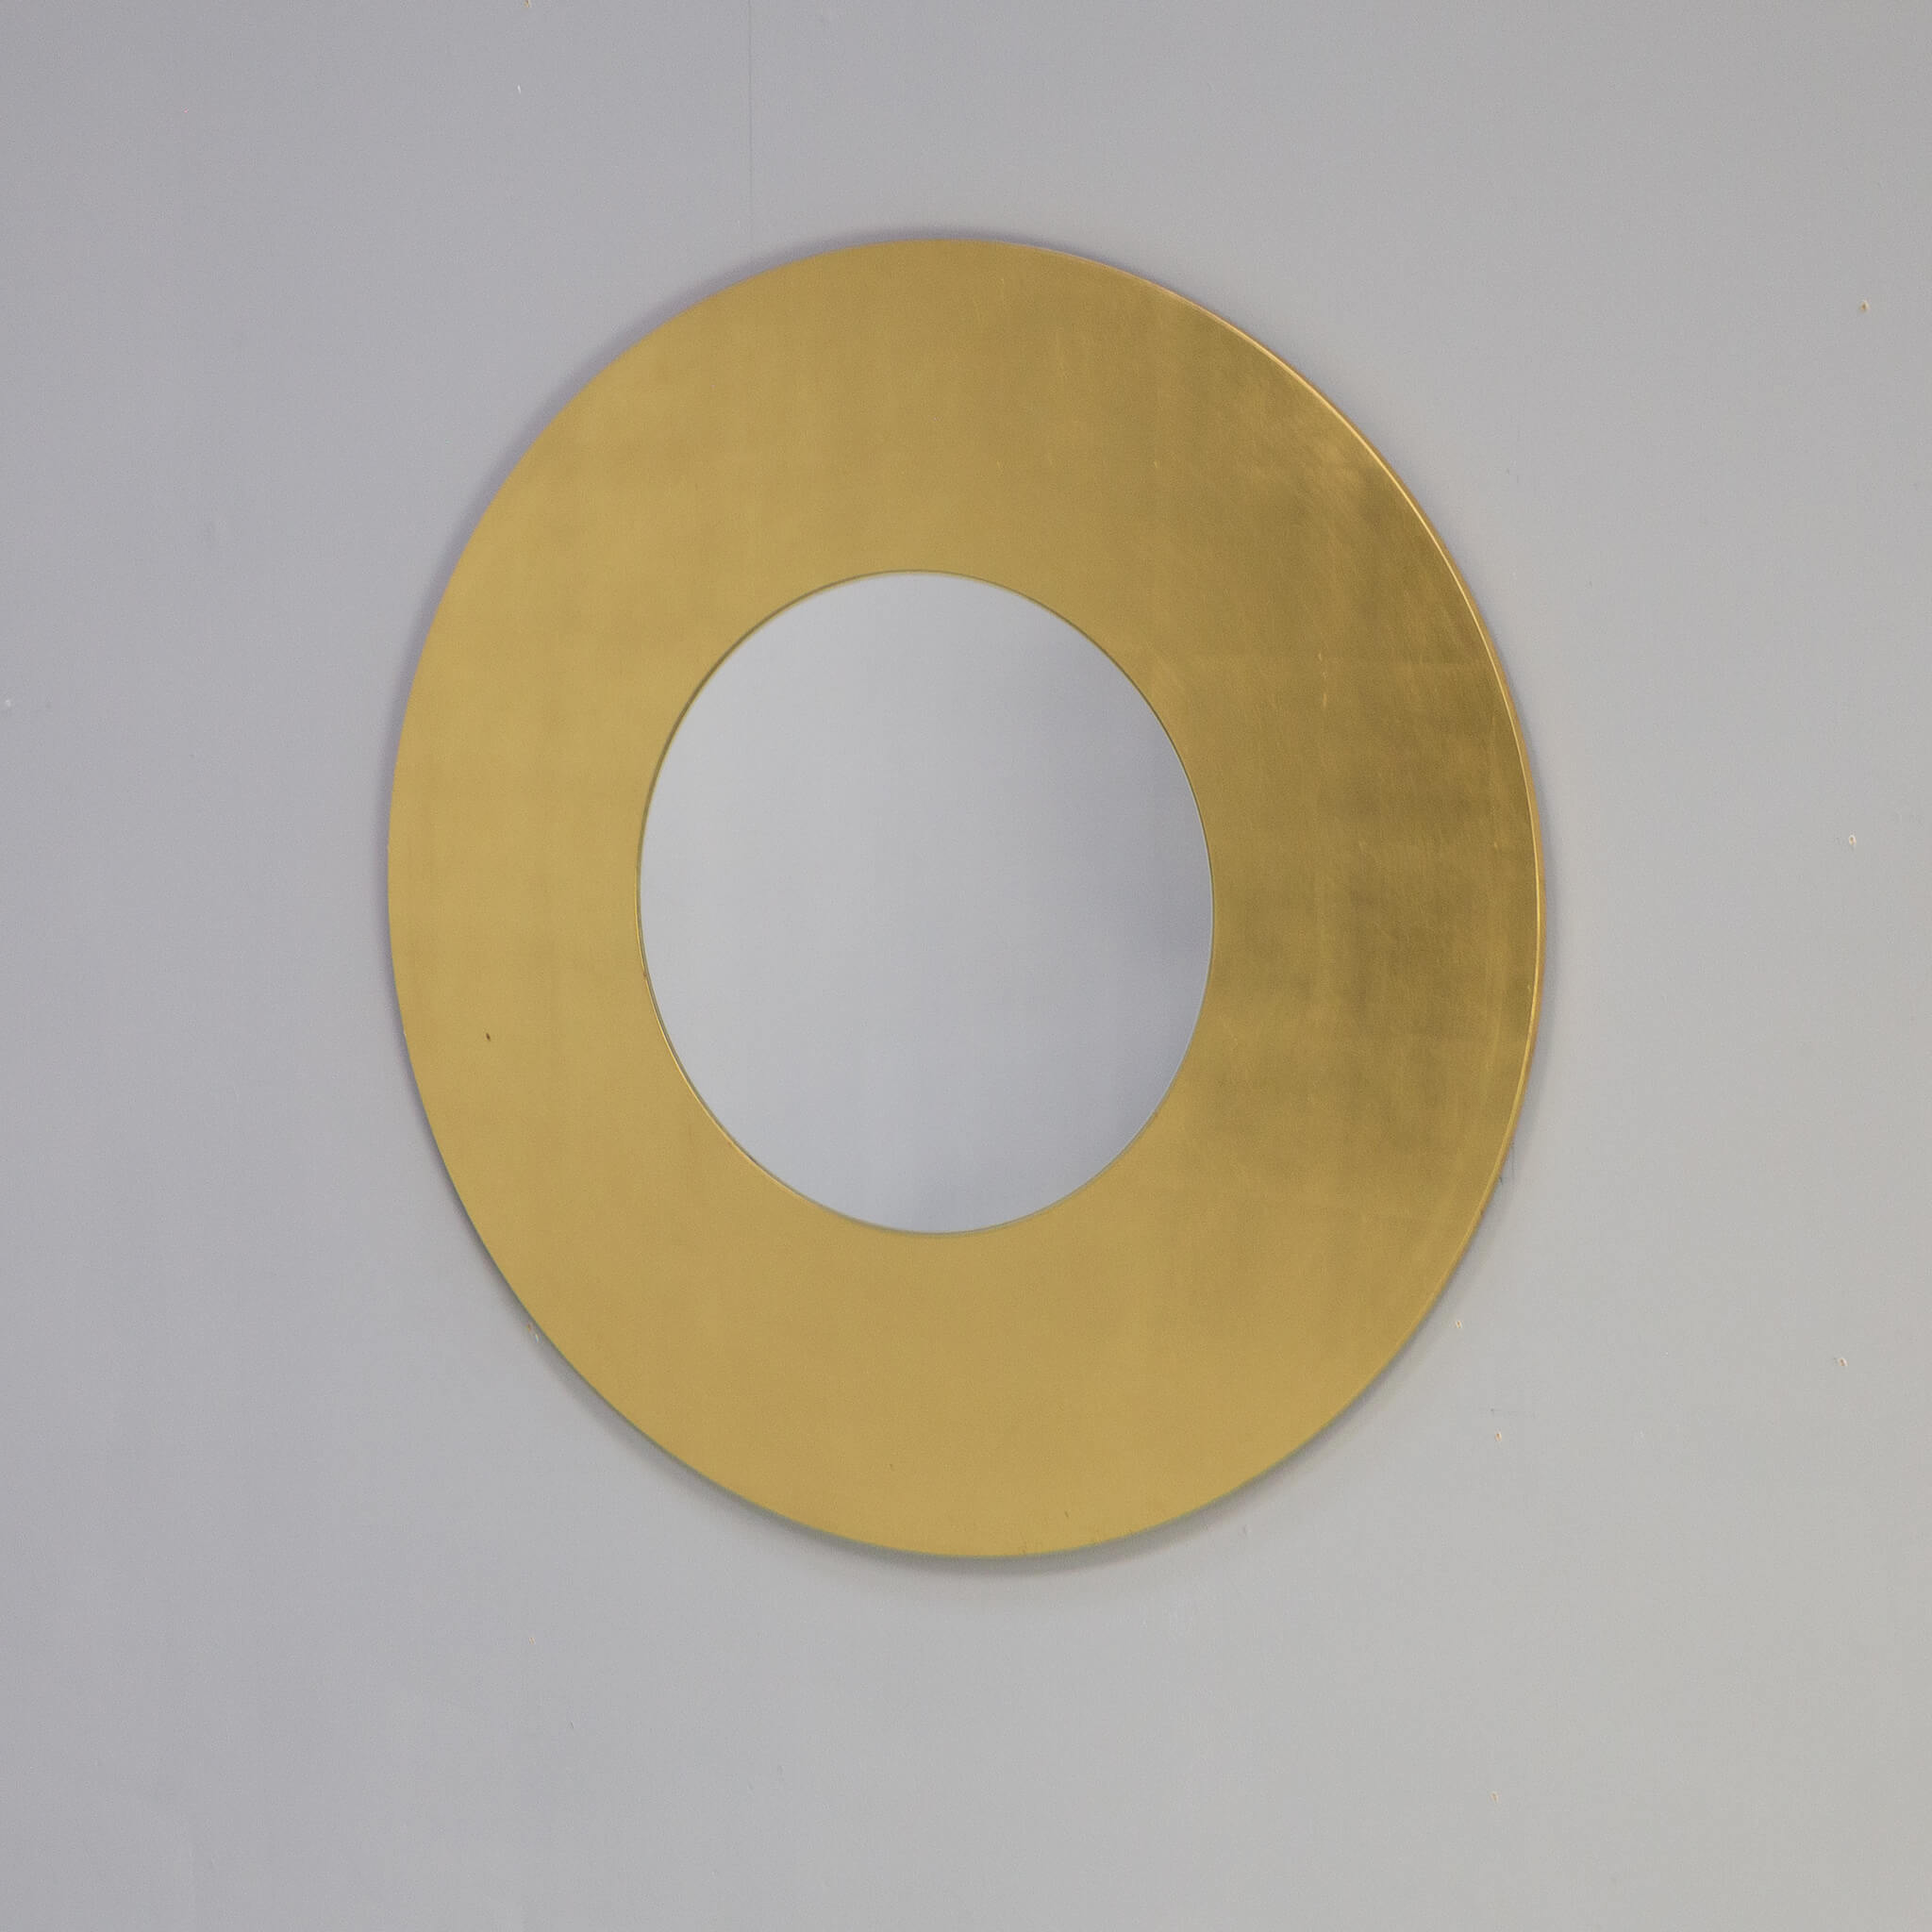 Designed by Lella and Massimo Vignelli, Lago Dorato is a refined and precious round mirror produced by Morphos, which is characterized by an elegant circular wooden frame with gold leaf gilding. Refined lines, perfect for decorating any environment